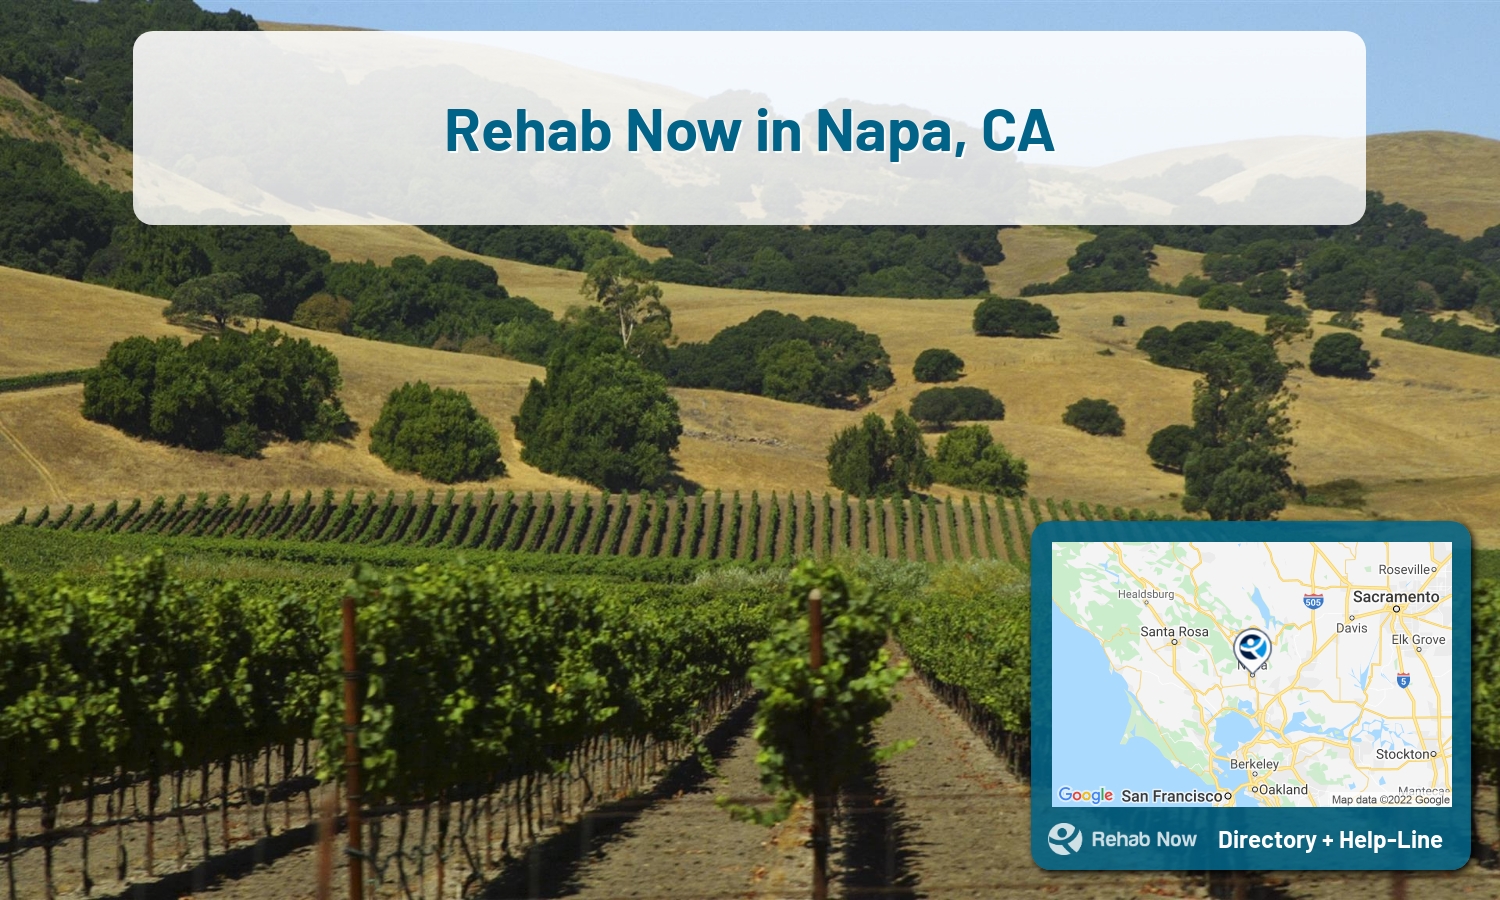 Drug rehab and alcohol treatment services nearby Napa, CA. Need help choosing a treatment program? Call our free hotline!